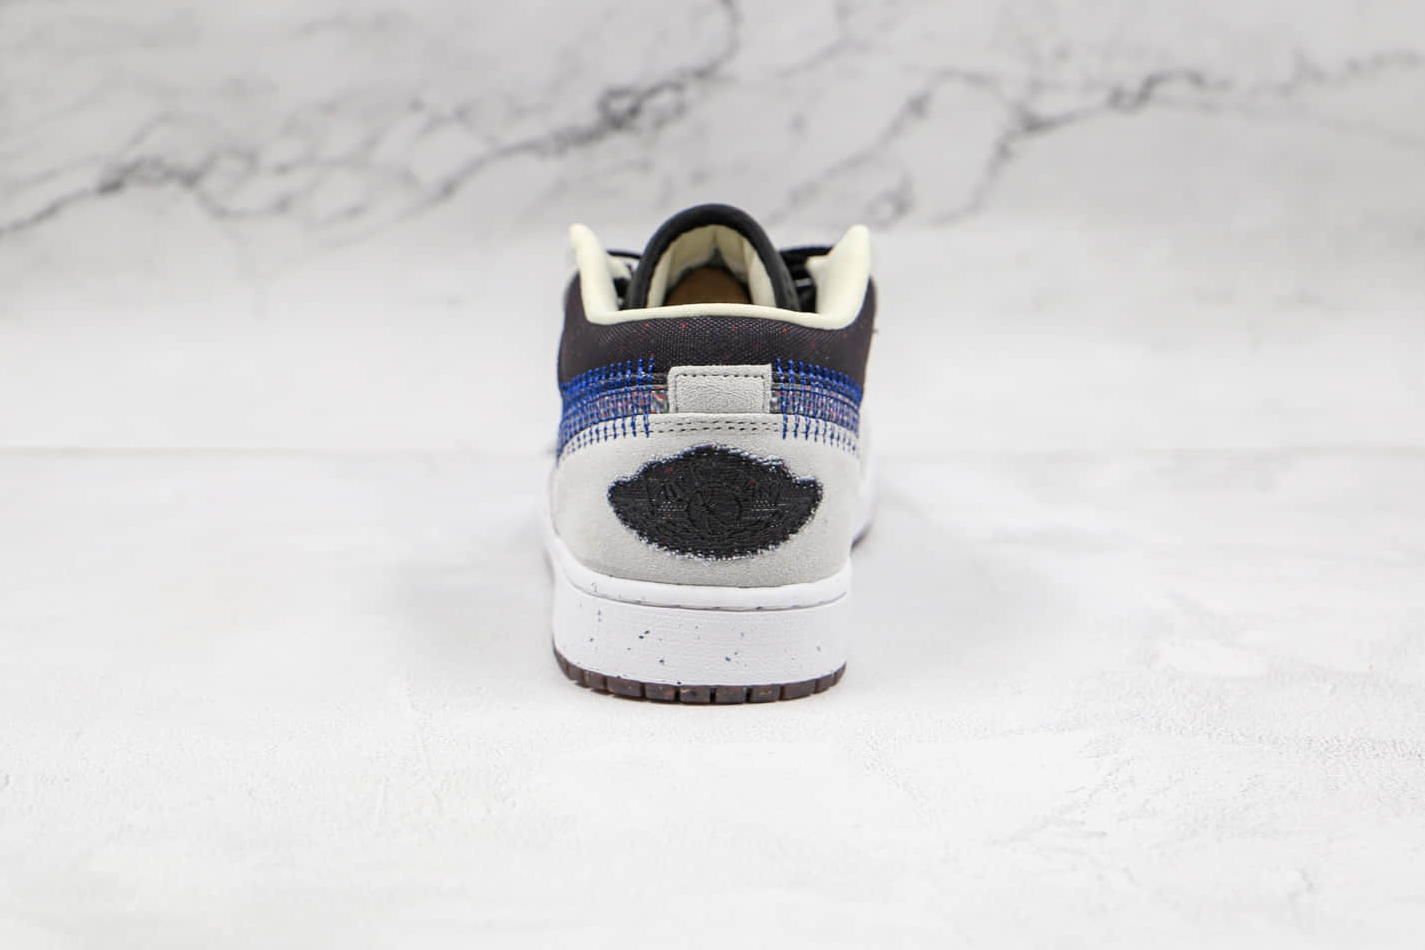 Air Jordan 1 Low 'Crater' DM4657-001 - Stylish and sustainable sneakers